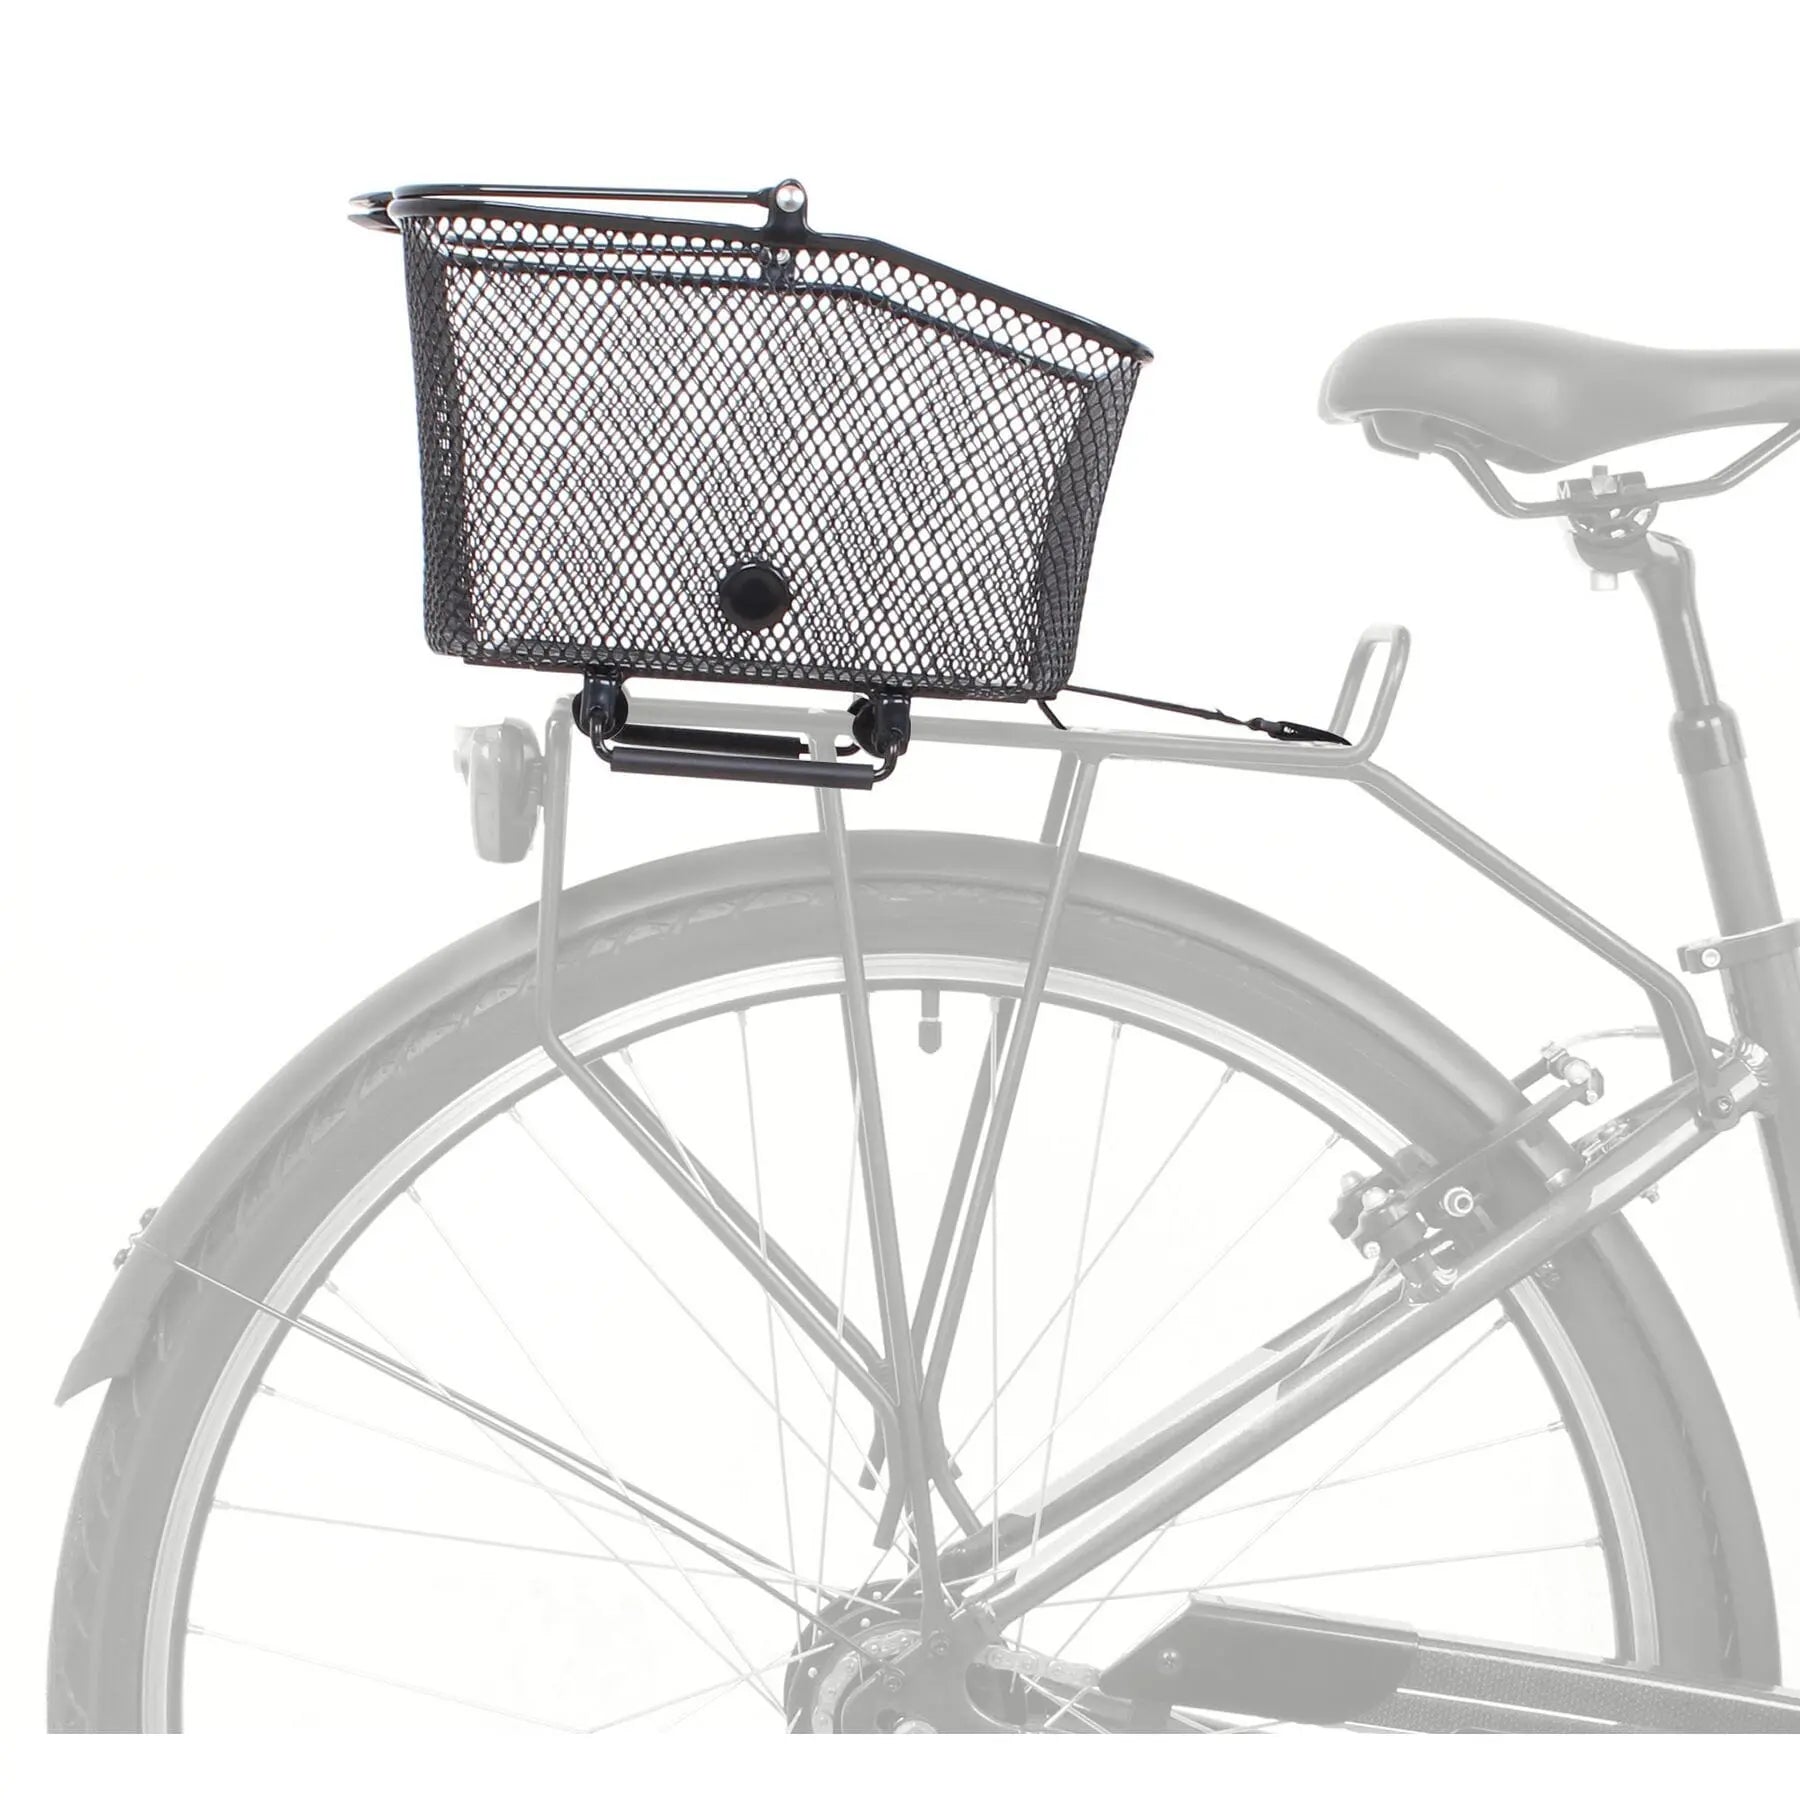 M-Part Brocante mesh rear basket with spring clips and handles M-part